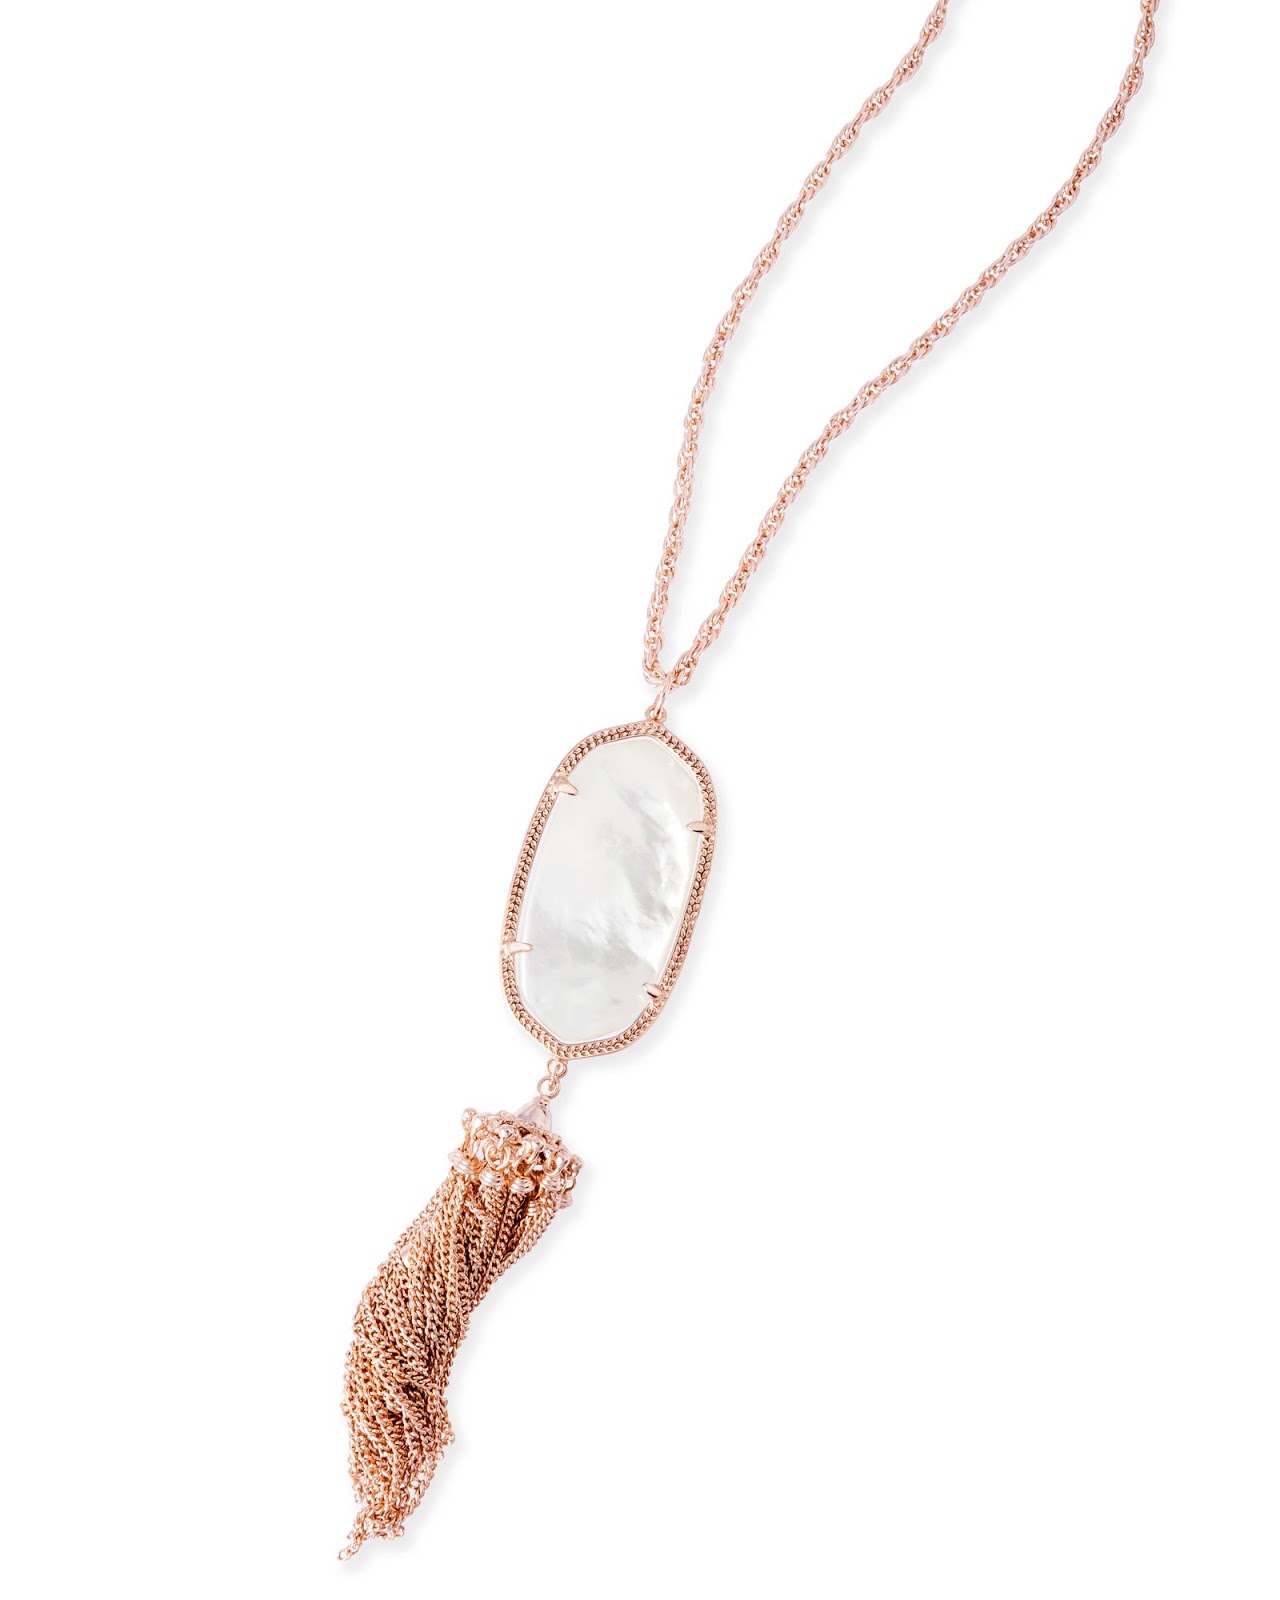 Kendra Scott Rose Gold Mother of Pearl Rayne Necklace